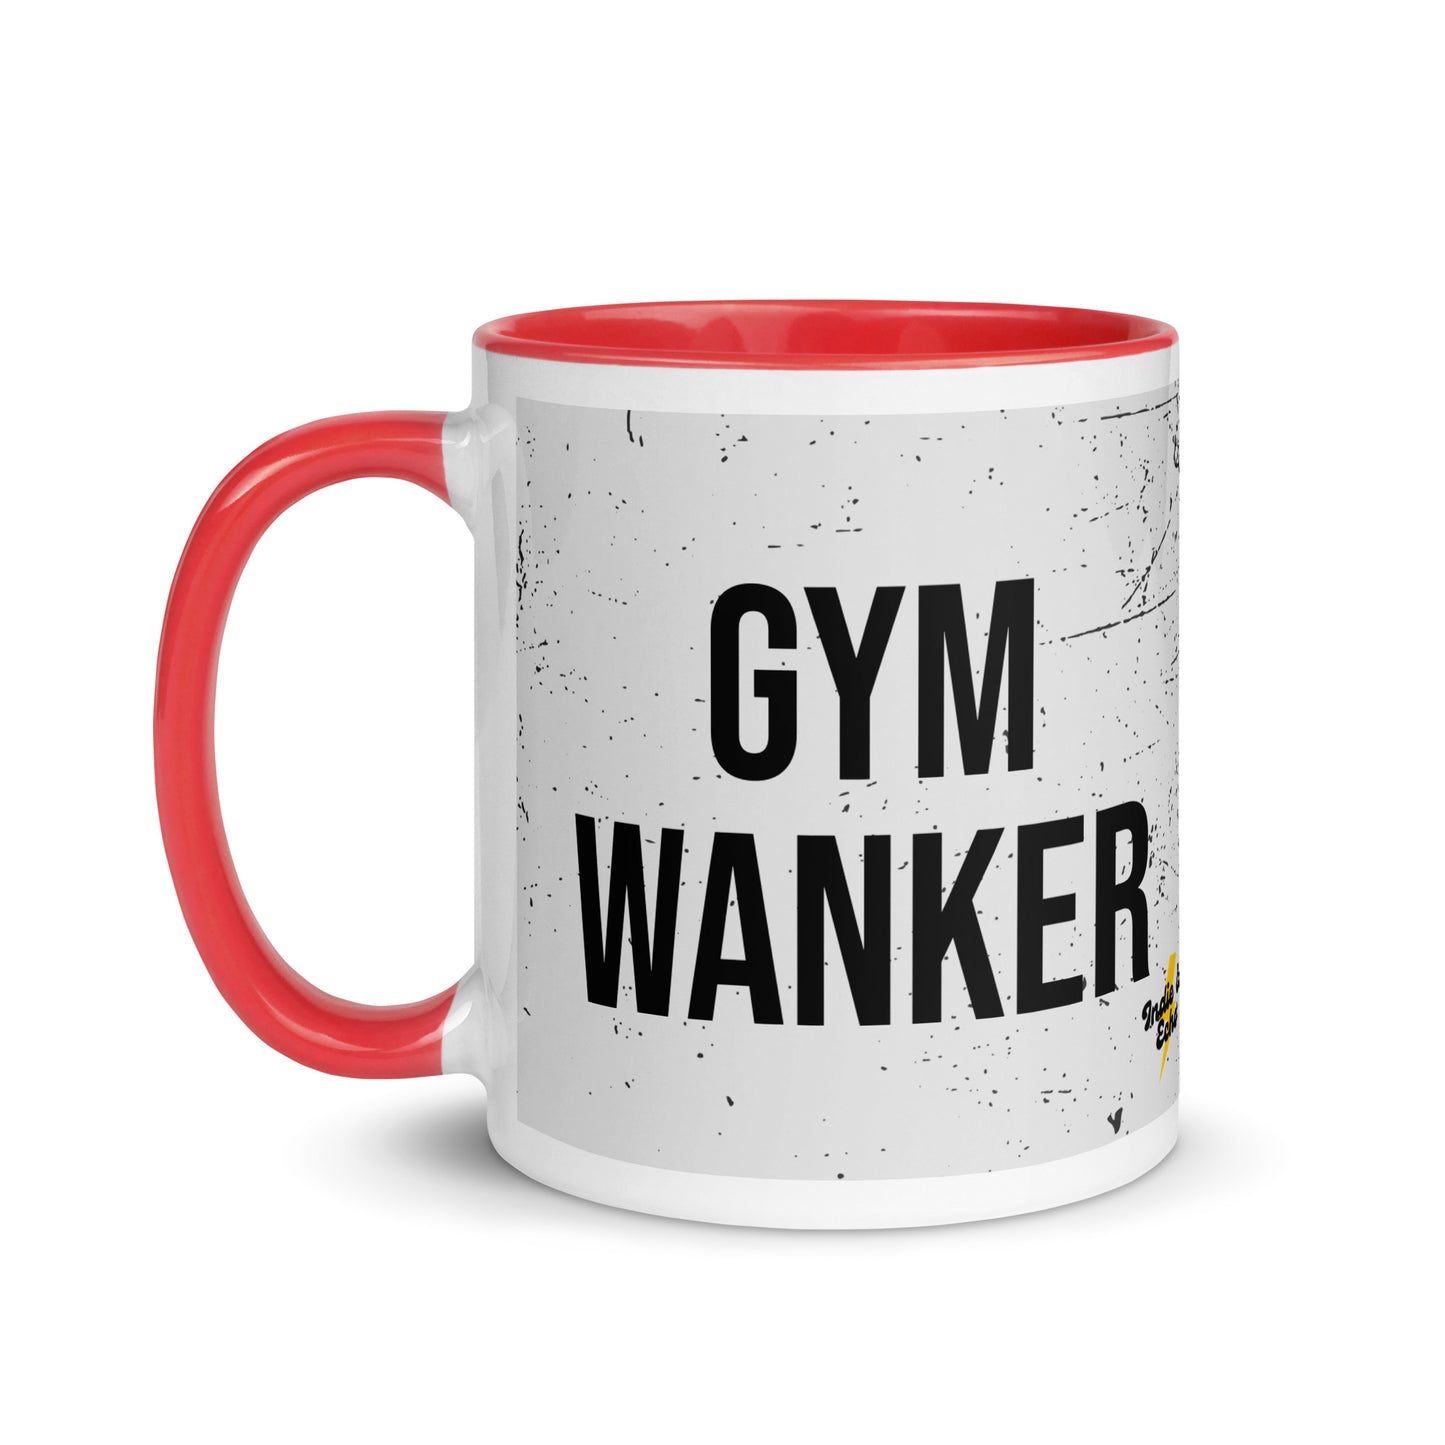 Red handled mug with gym wanker written on it, across a grey splatter background. A gift for someone who loves the gym.